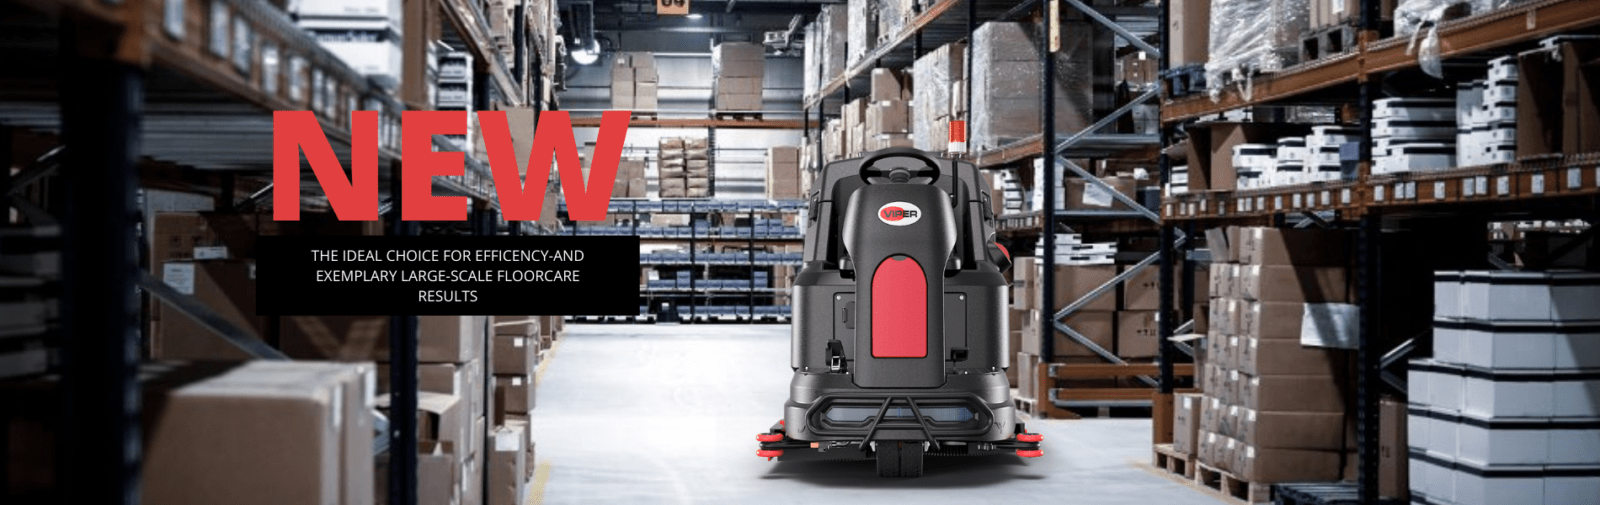 Viper New Scrubber Dryer AS1050